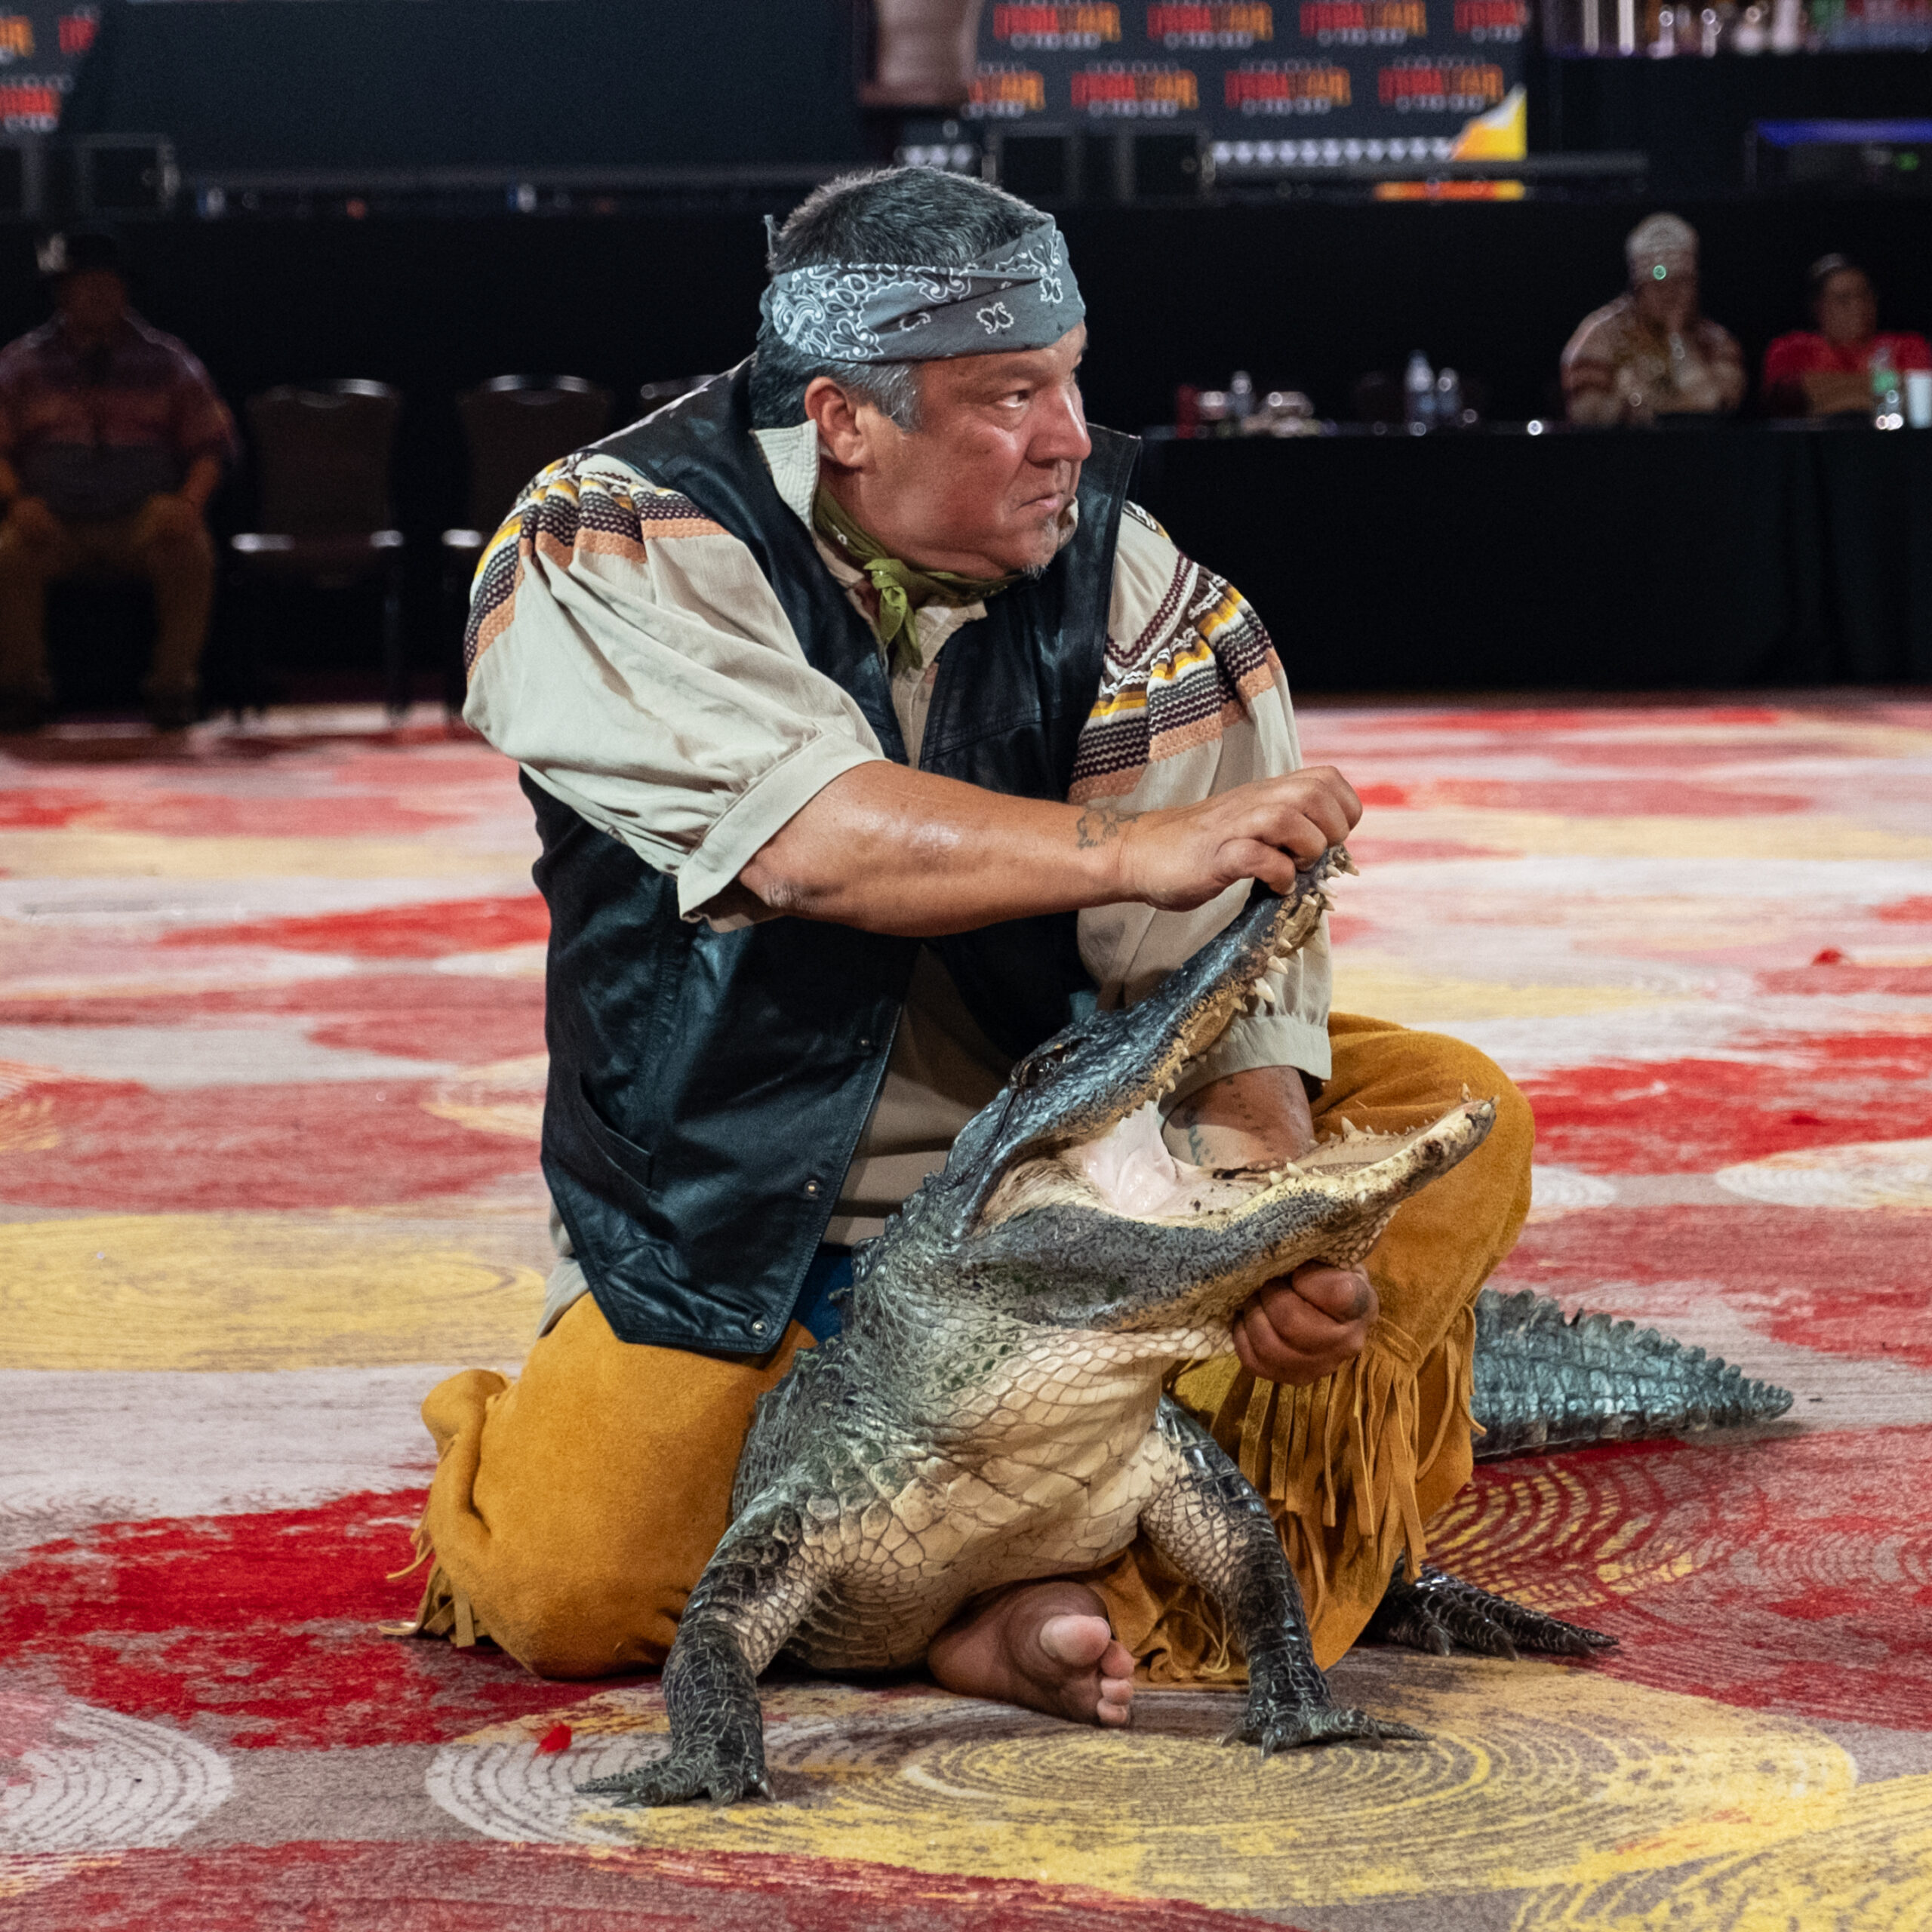 Billy Walker, a Seminole alligator wrestler, puts on a daring performance for powwow spectators each night during the powwow. The alligator demonstration ties back to the Tribe’s history and hunting practices in Florida’s wetlands